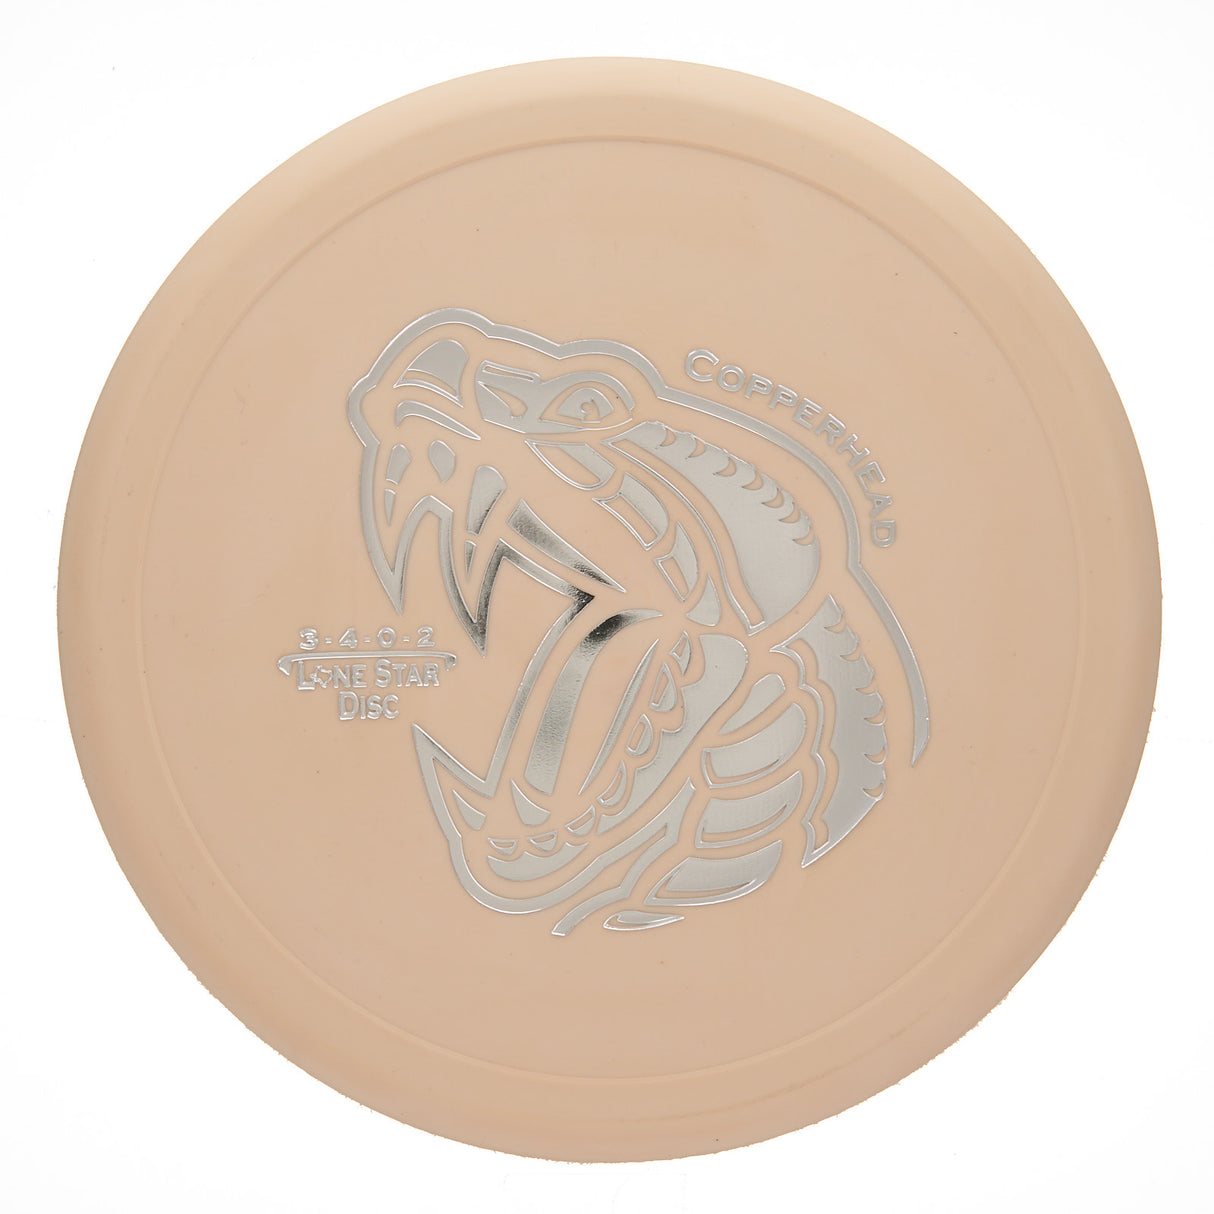 Lone Star Disc Copperhead - Artist Series Victor 2 169g | Style 0001